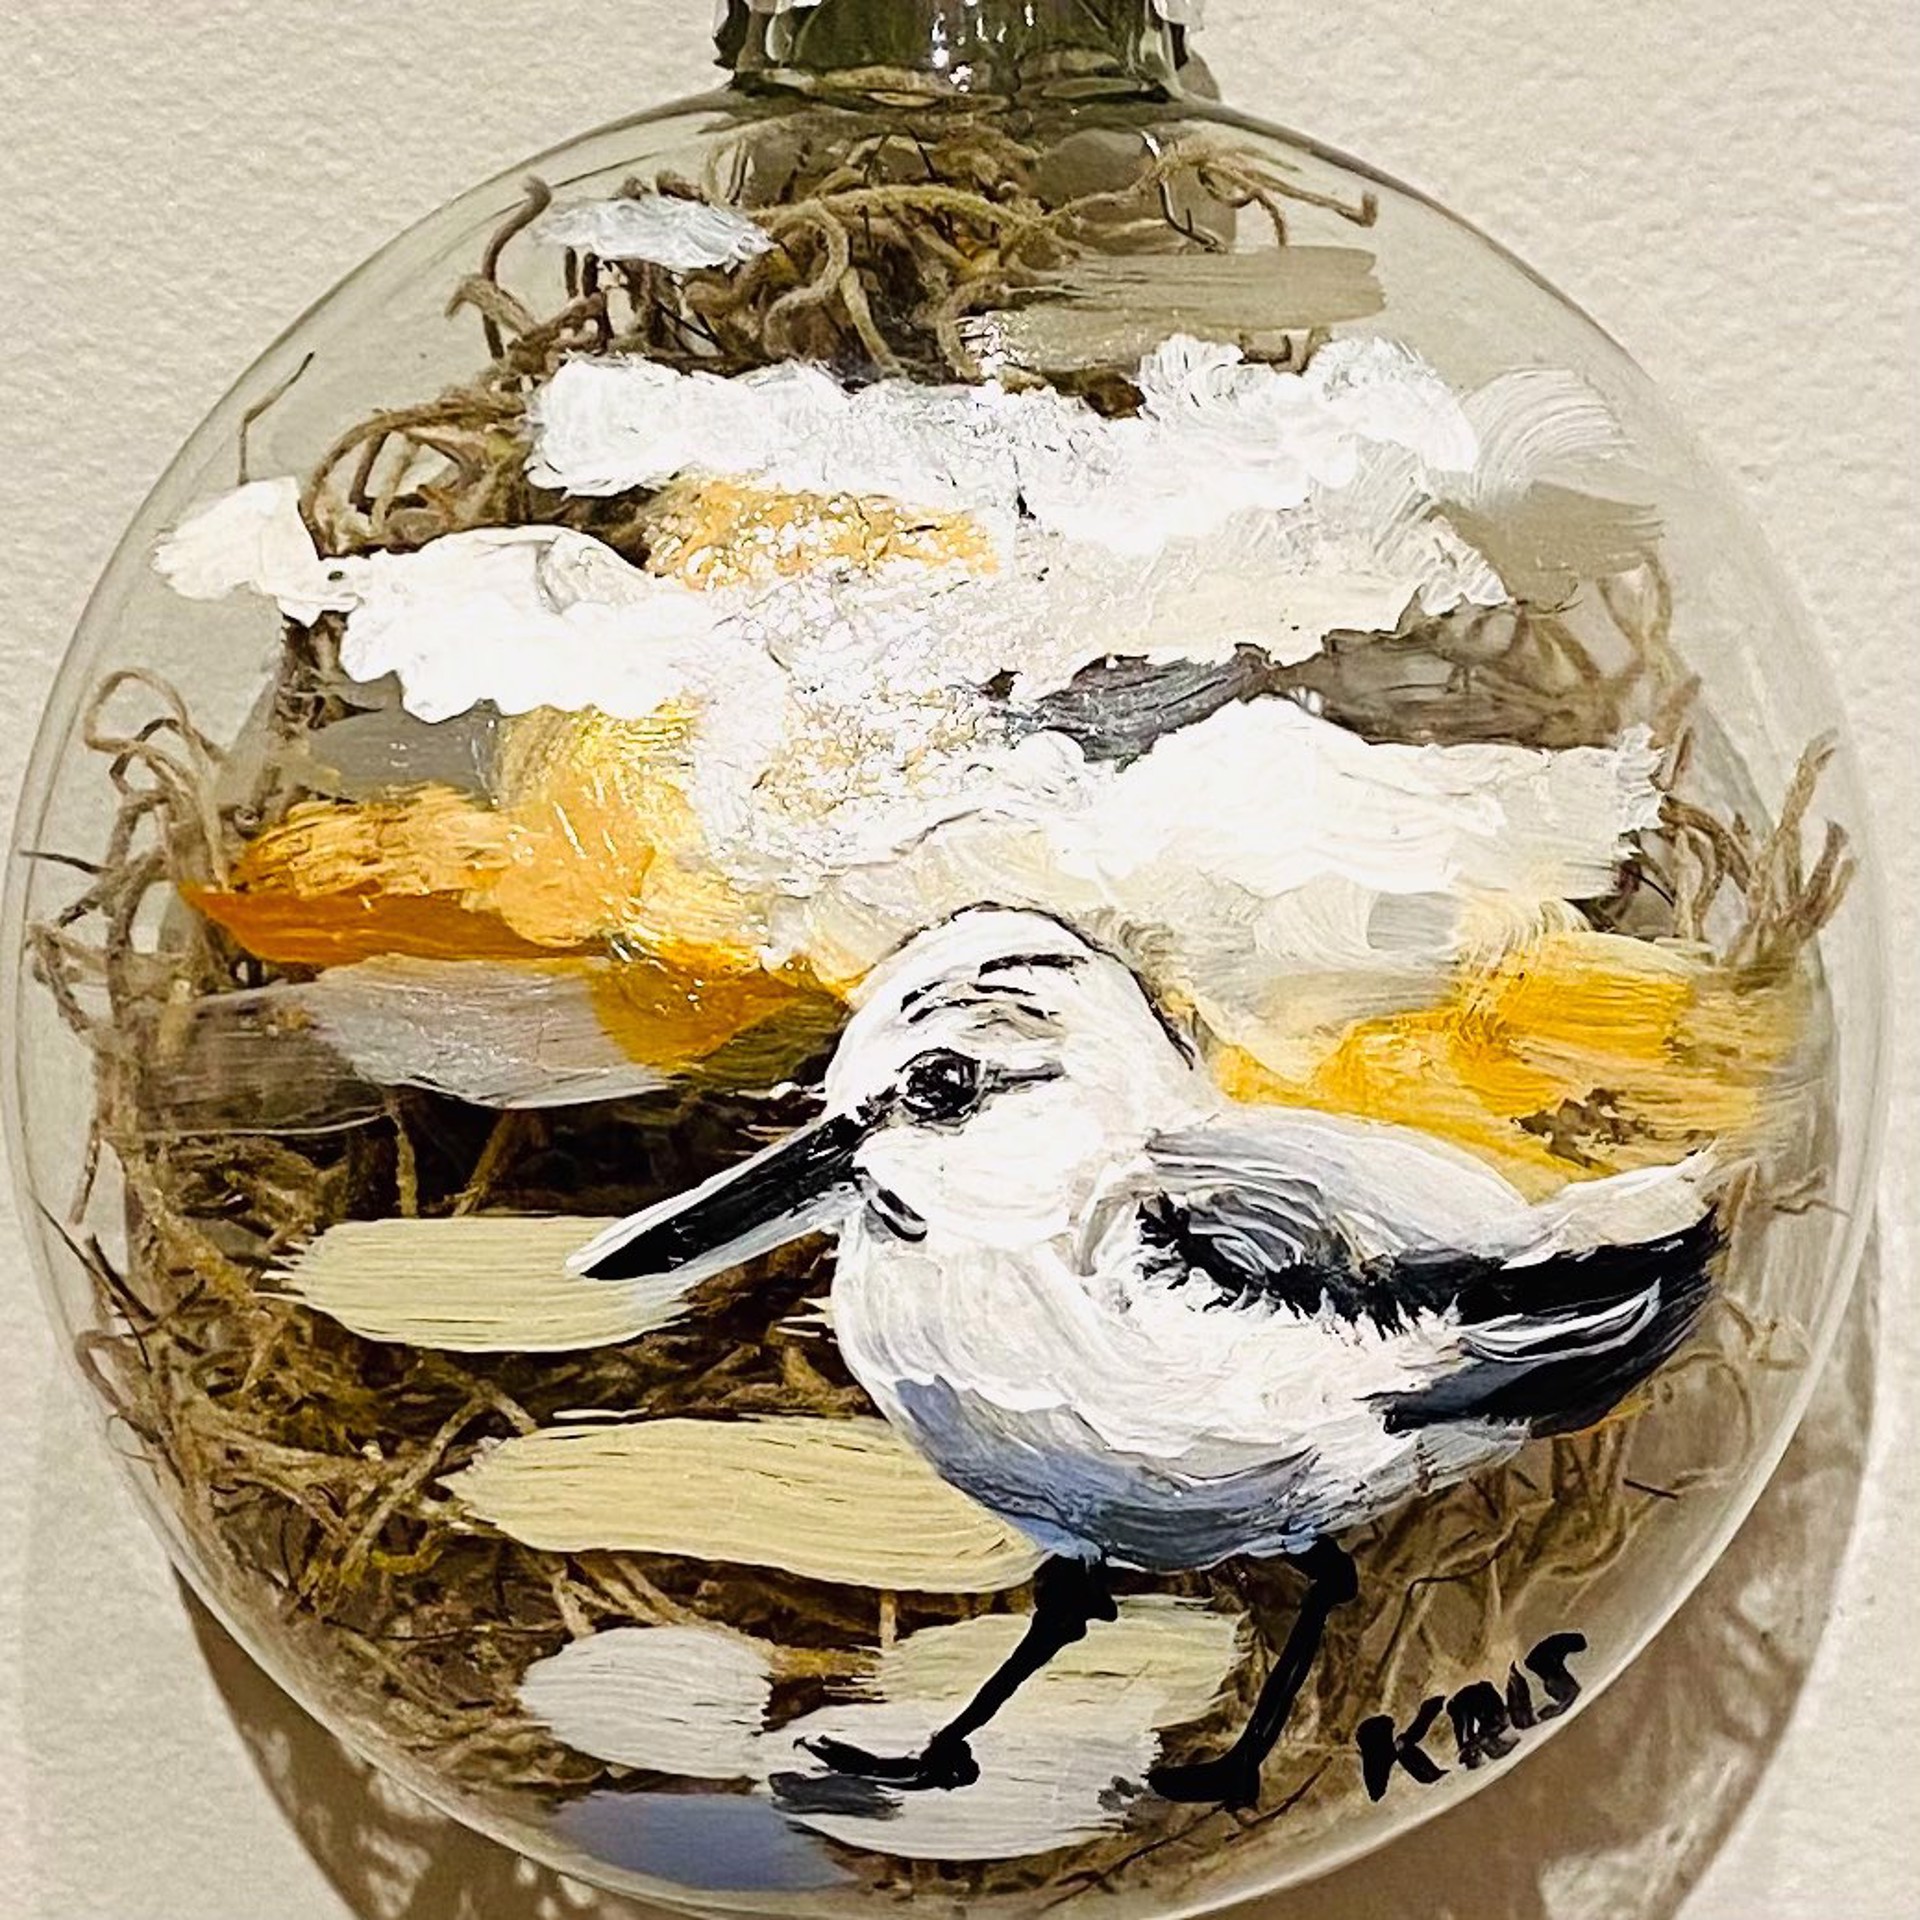 Sandpiper Ornament by Kris Manning